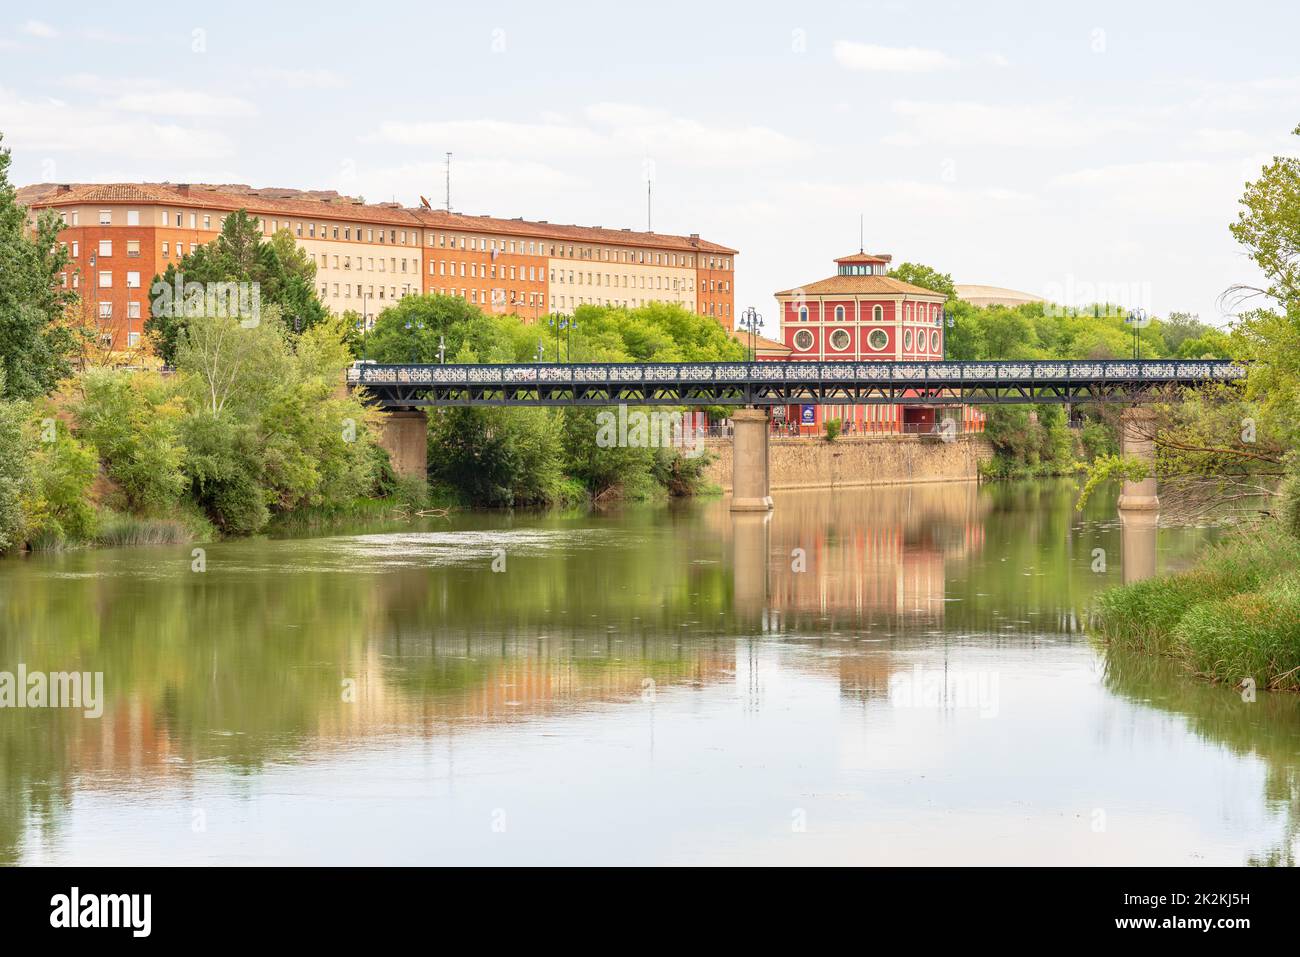 Scenic view of River Ebro and Puente de Hierro as it flows through out Logroño, La Rioja, Spain Stock Photo